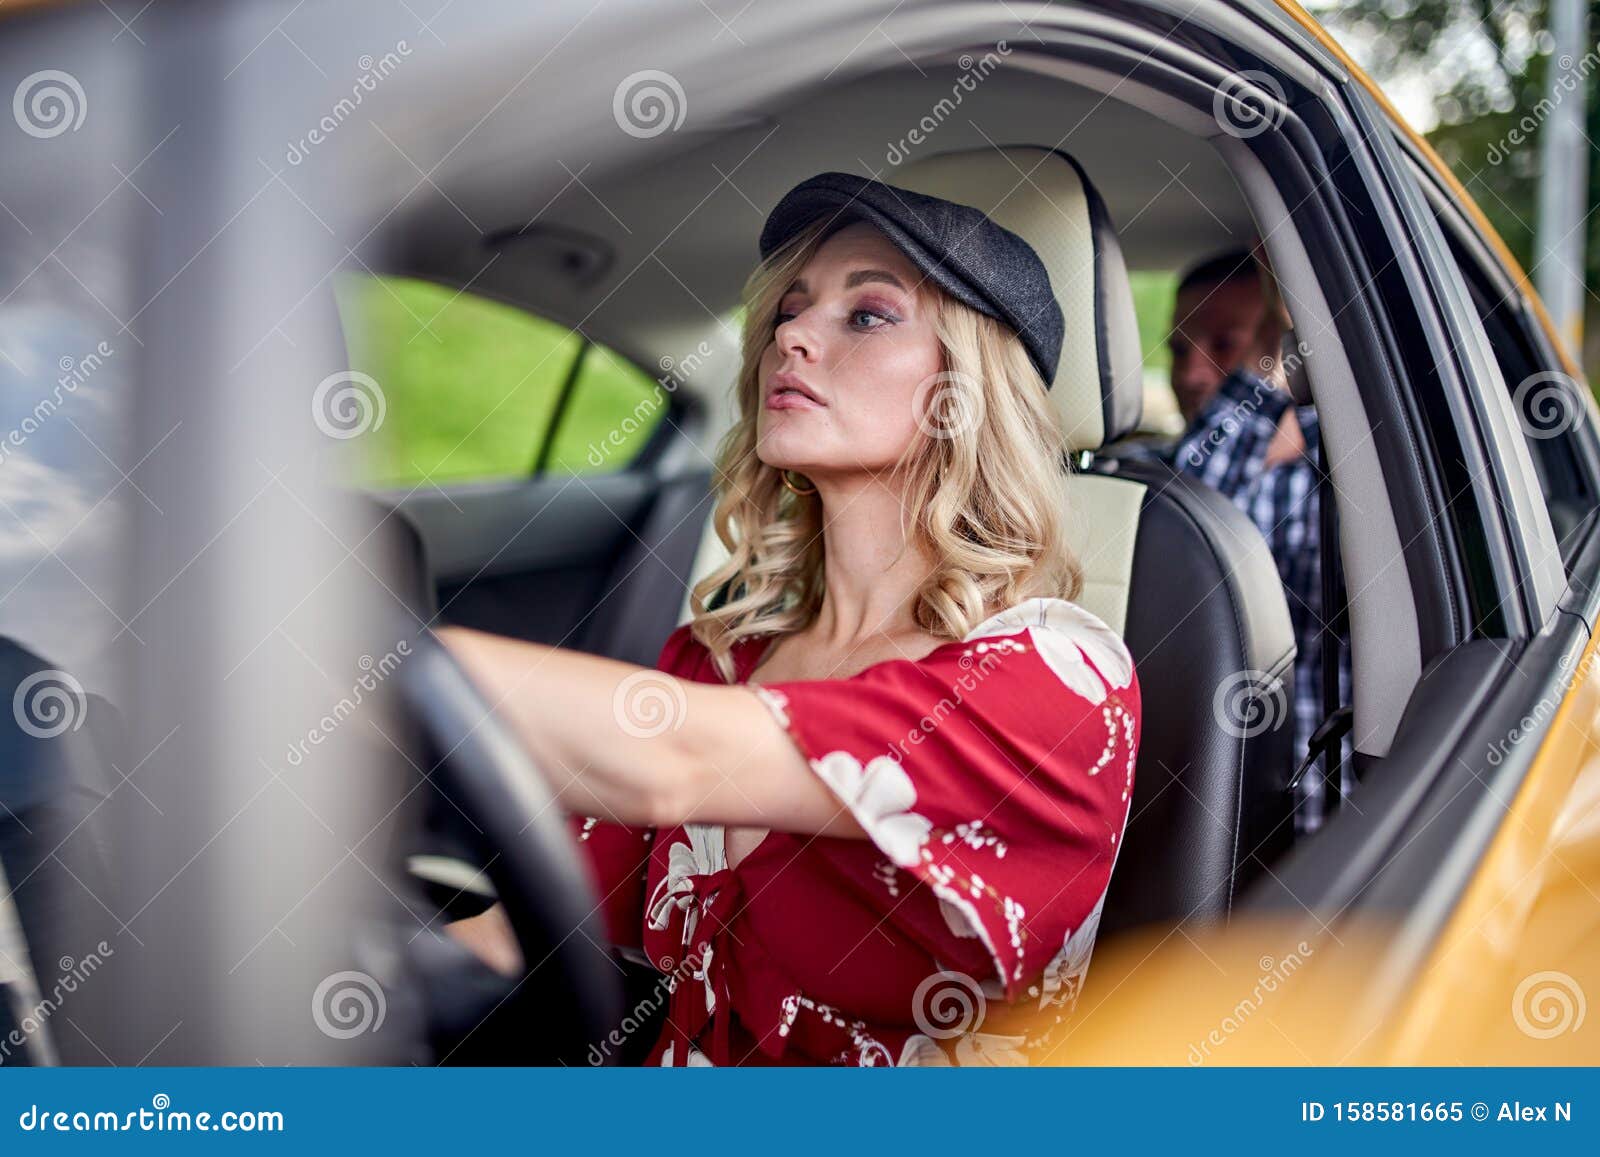 Image Of Blonde Female Driver Driving Male Passenger In Car Stock